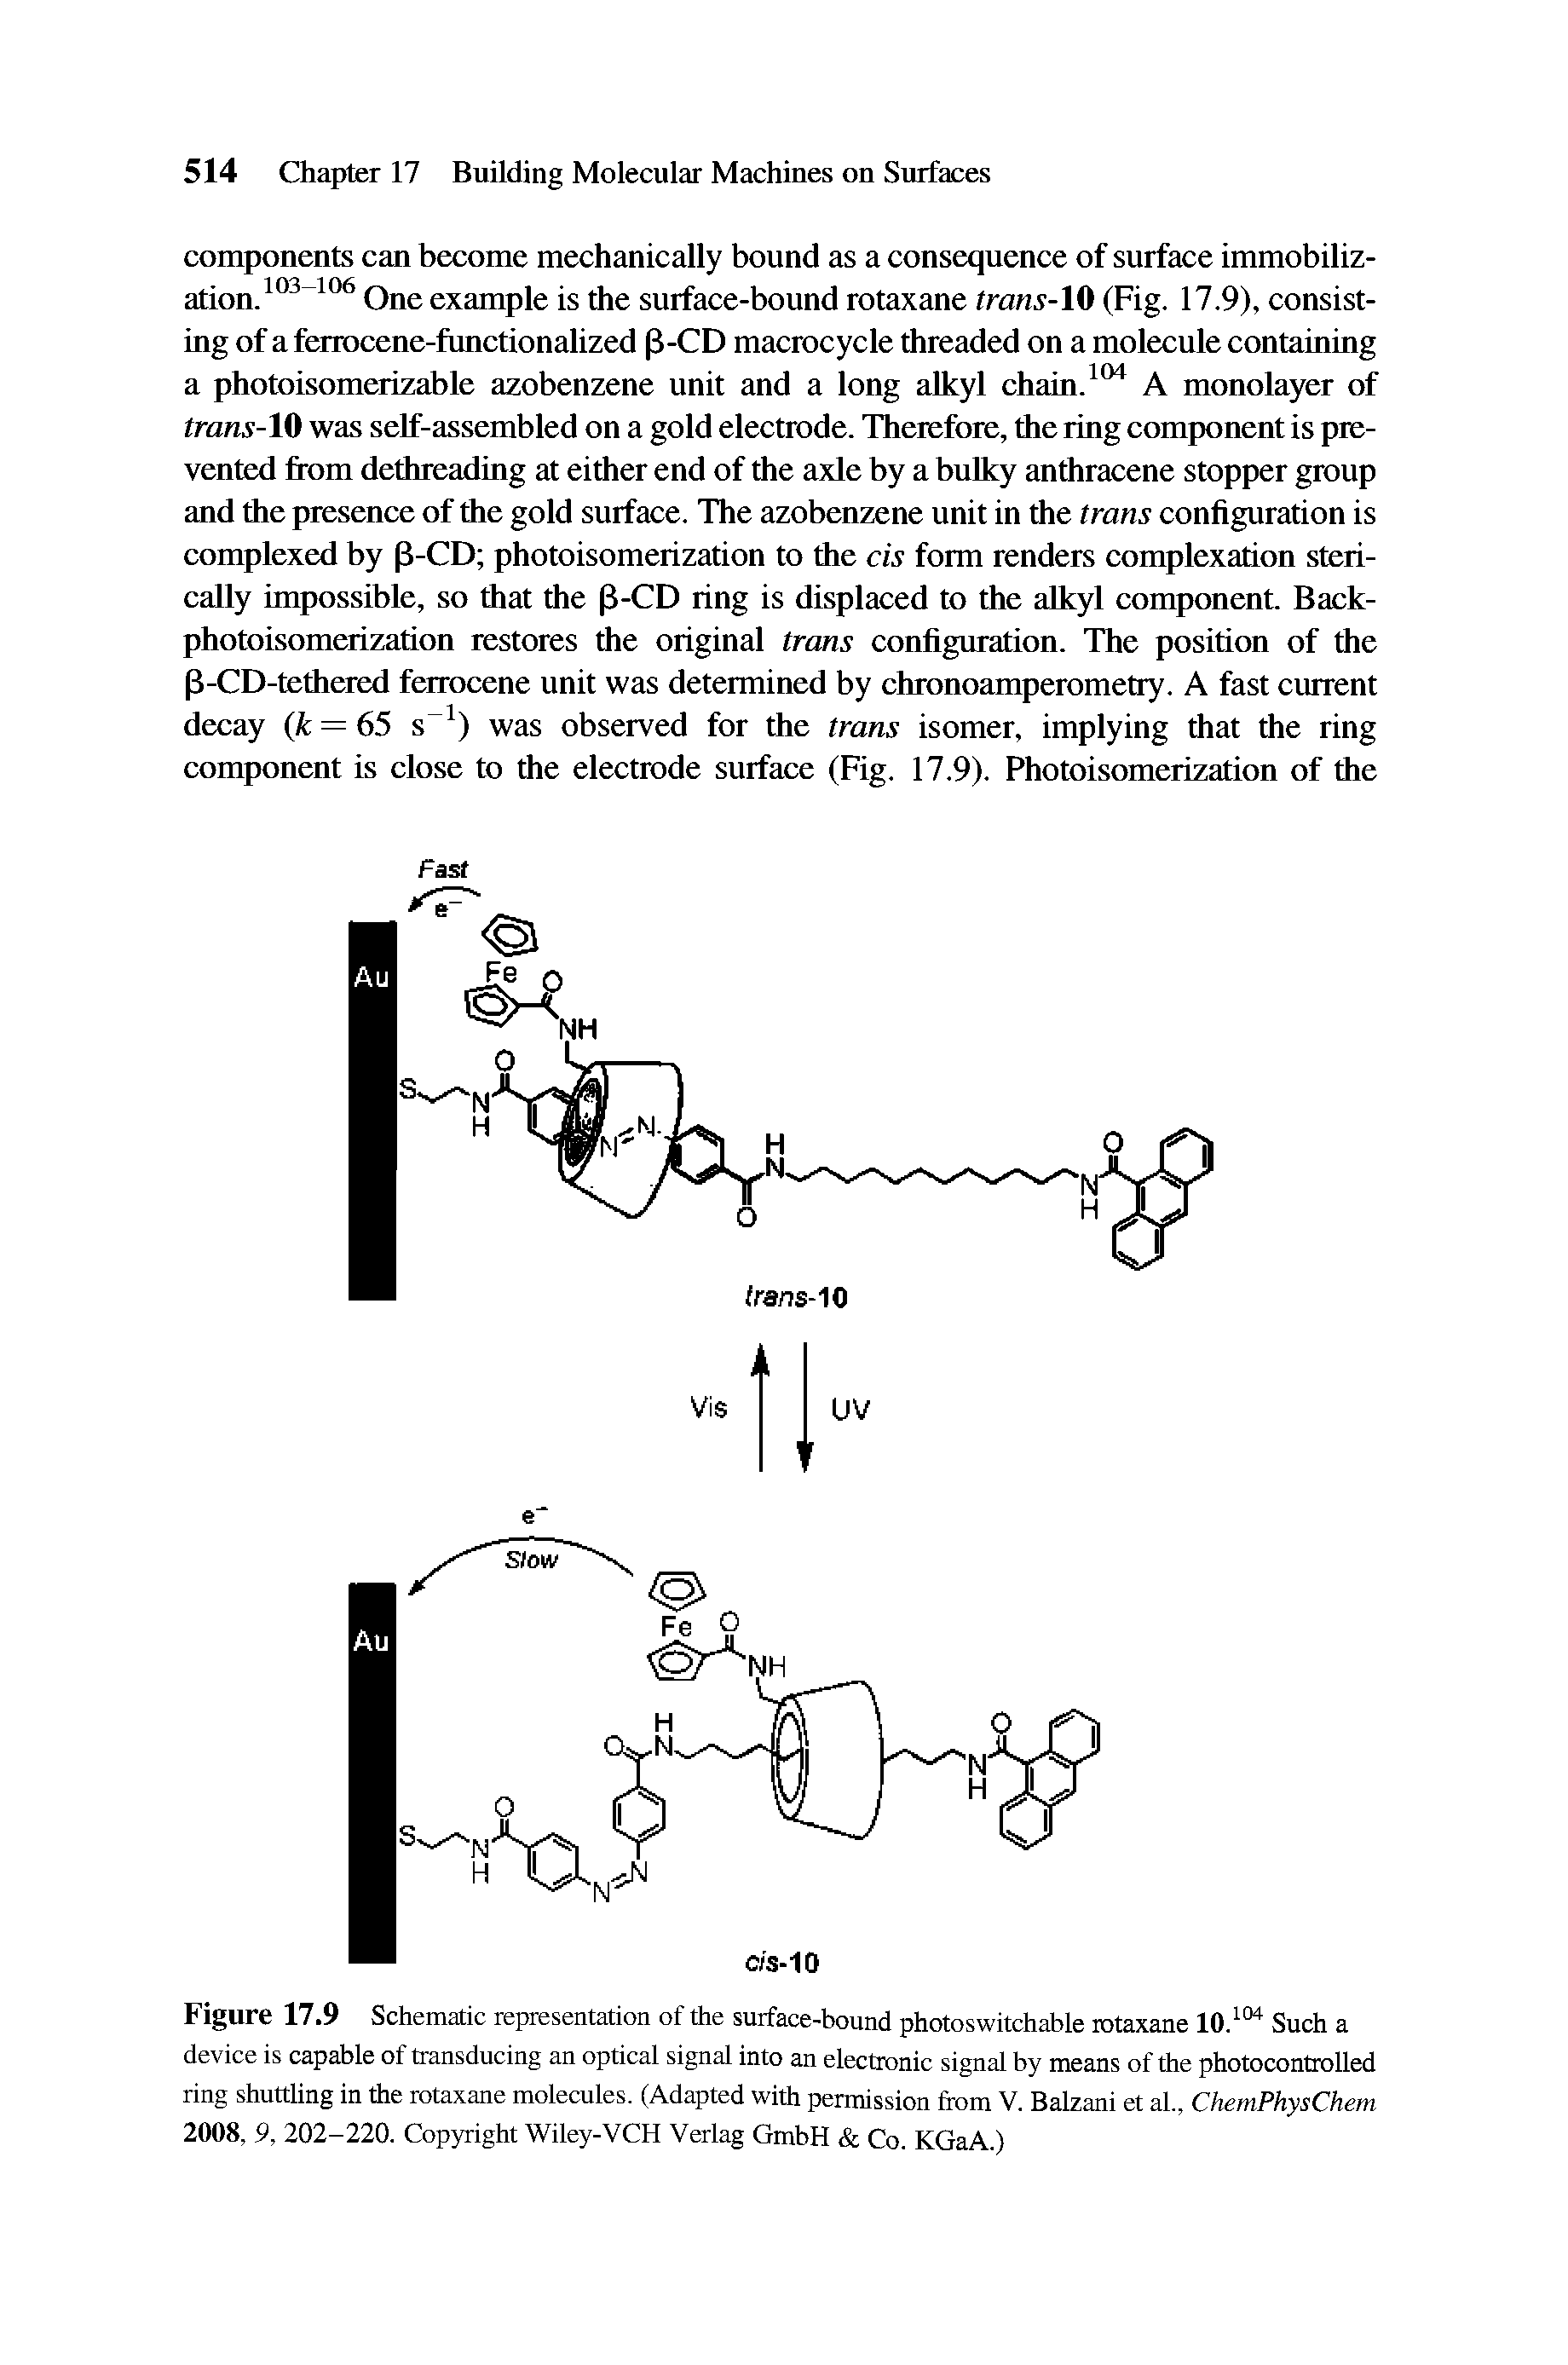 Figure 17.9 Schematic representation of the surface-bound photoswitchable rotaxane 10.104 Such a device is capable of transducing an optical signal into an electronic signal by means of the photocontrolled ring shuttling in the rotaxane molecules. (Adapted with permission from V. Balzani et al., ChemPhysChem 2008, 9, 202-220. Copyright Wiley-VCH Verlag GmbH Co. KGaA.)...